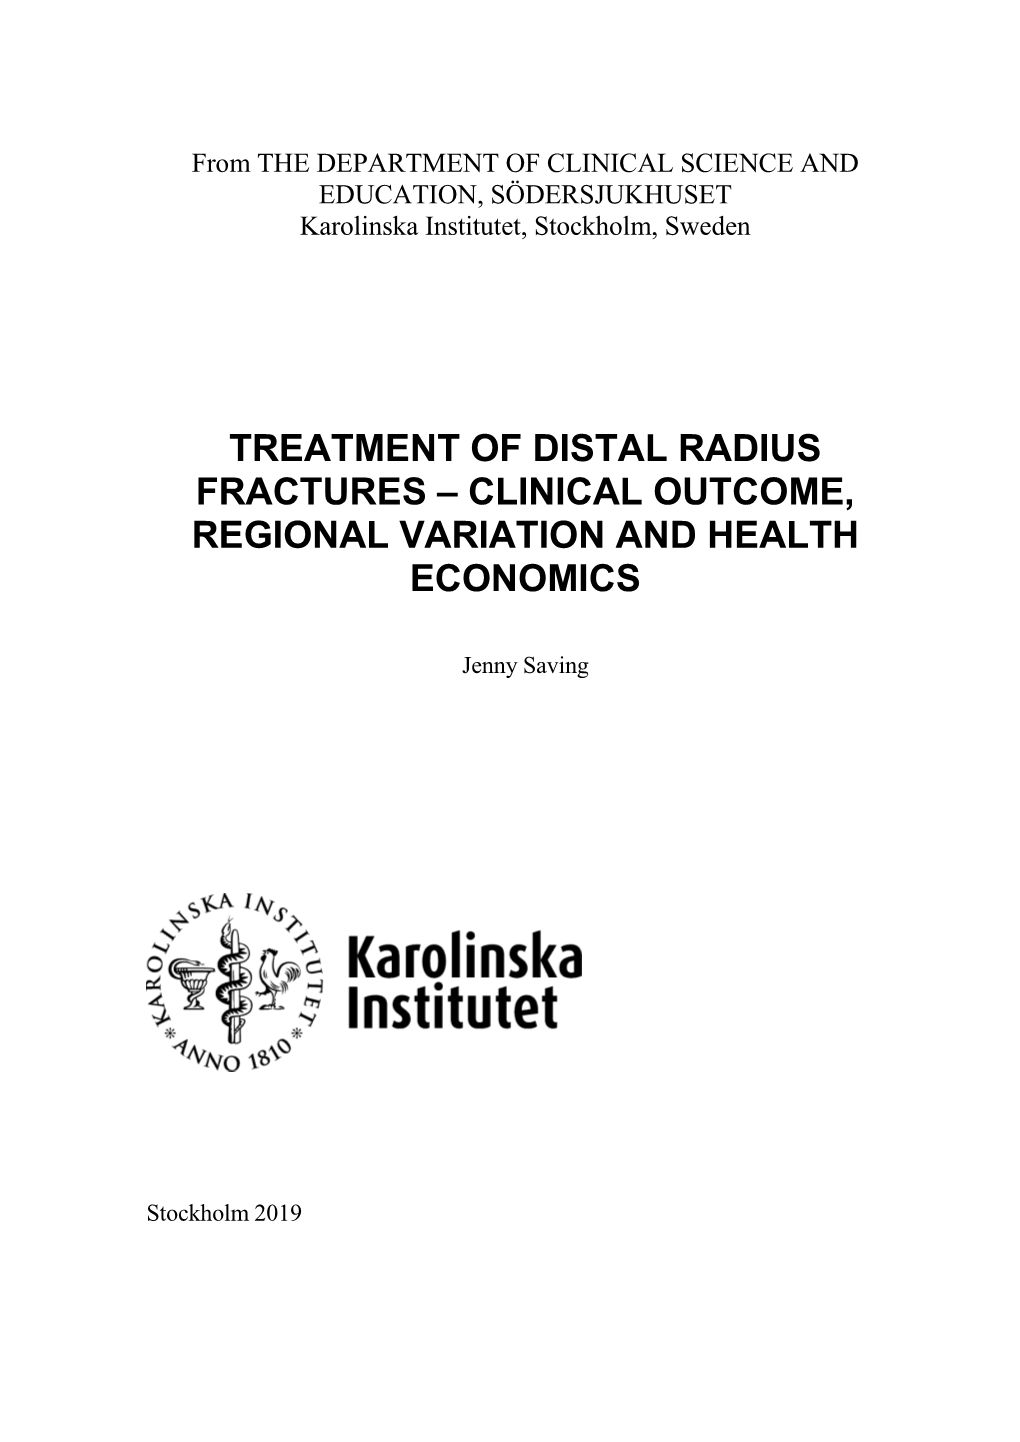 Treatment of Distal Radius Fractures – Clinical Outcome, Regional Variation and Health Economics